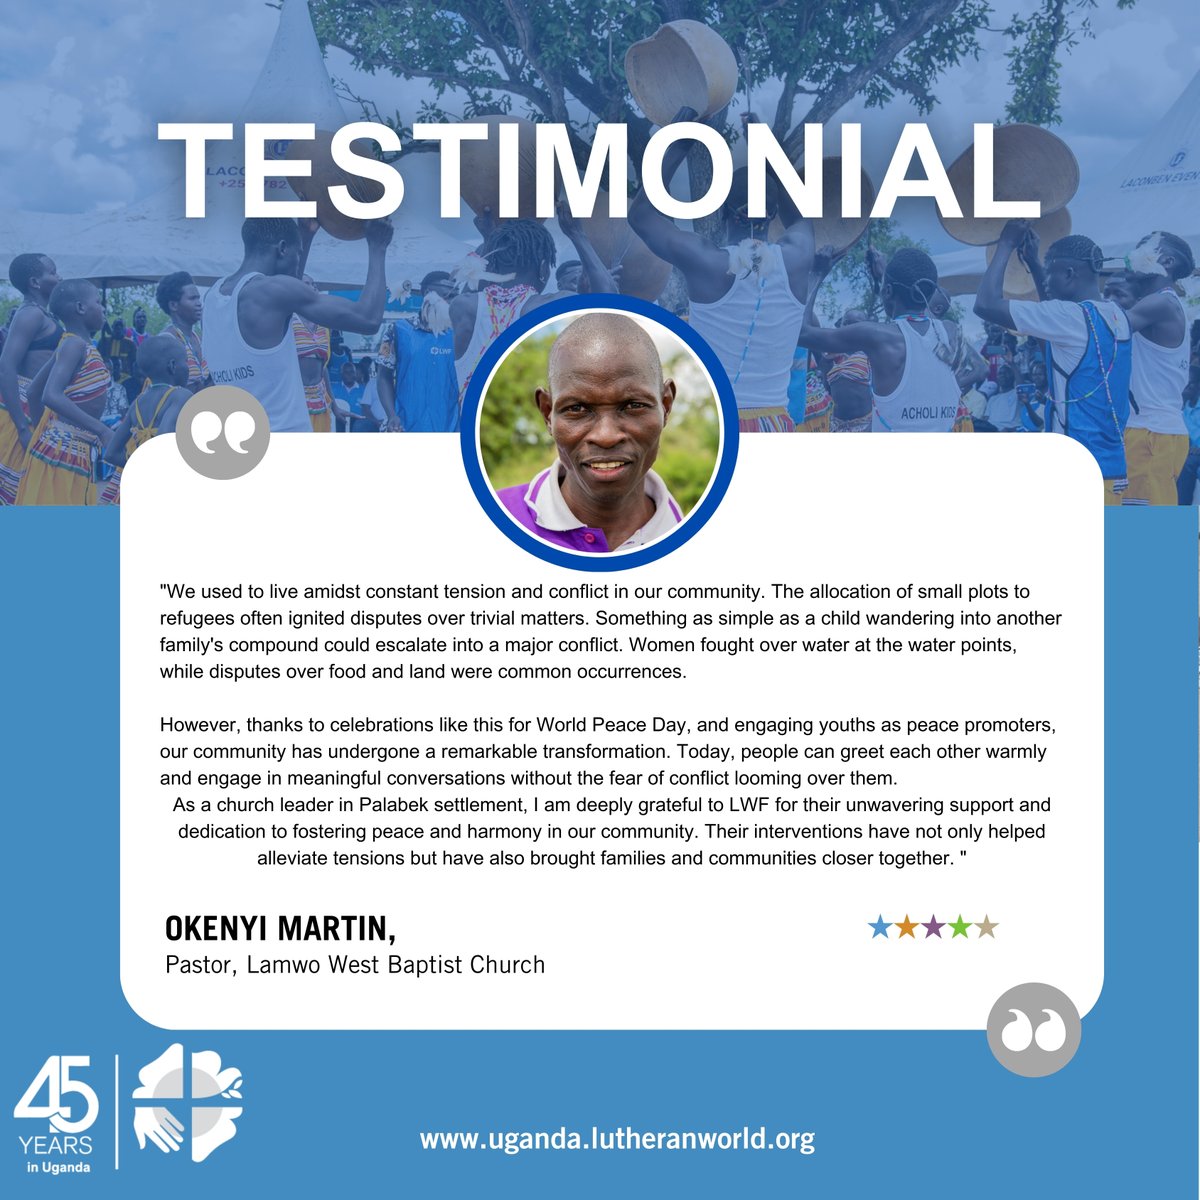 #Testimonial Pastor Okenyi Martin from Palabek Settlement shares about the newfound peace and harmony in his community. @EU_Partnerships